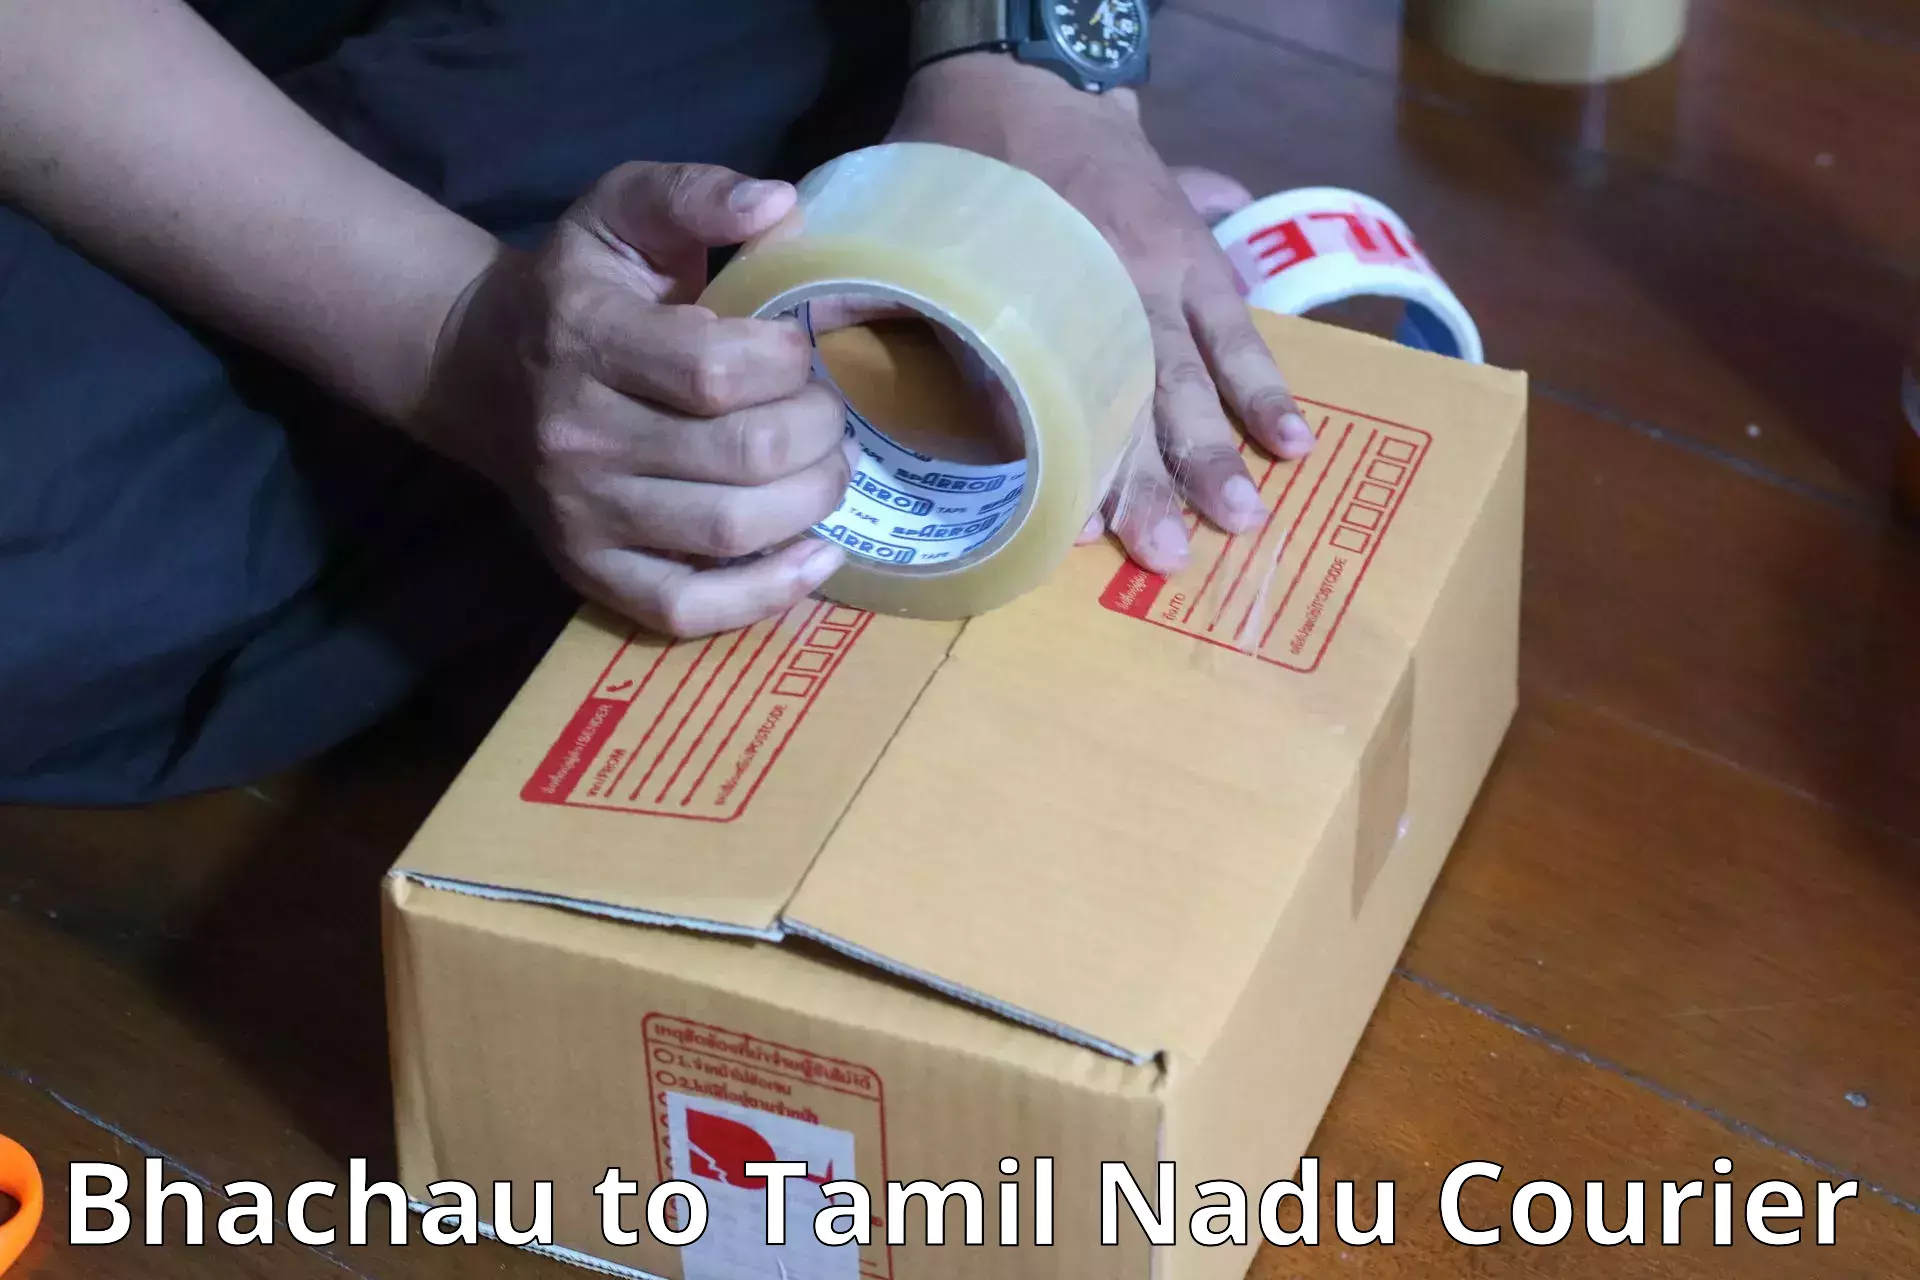 Personal effects shipping in Bhachau to Cuddalore